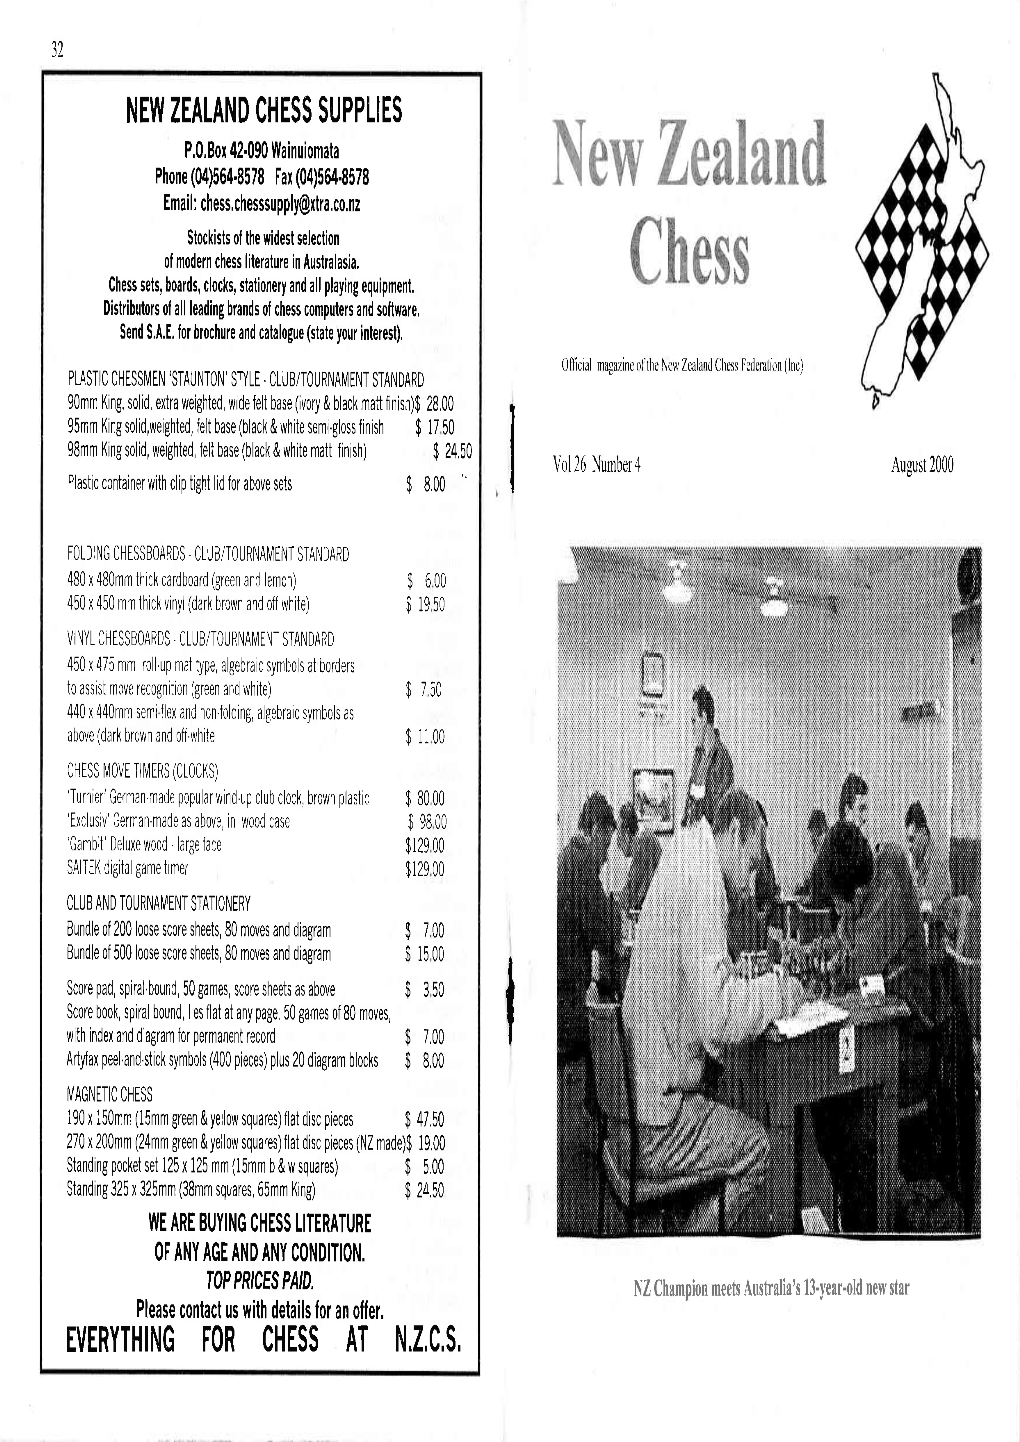 Everything for Chess at N.Z.C.S.